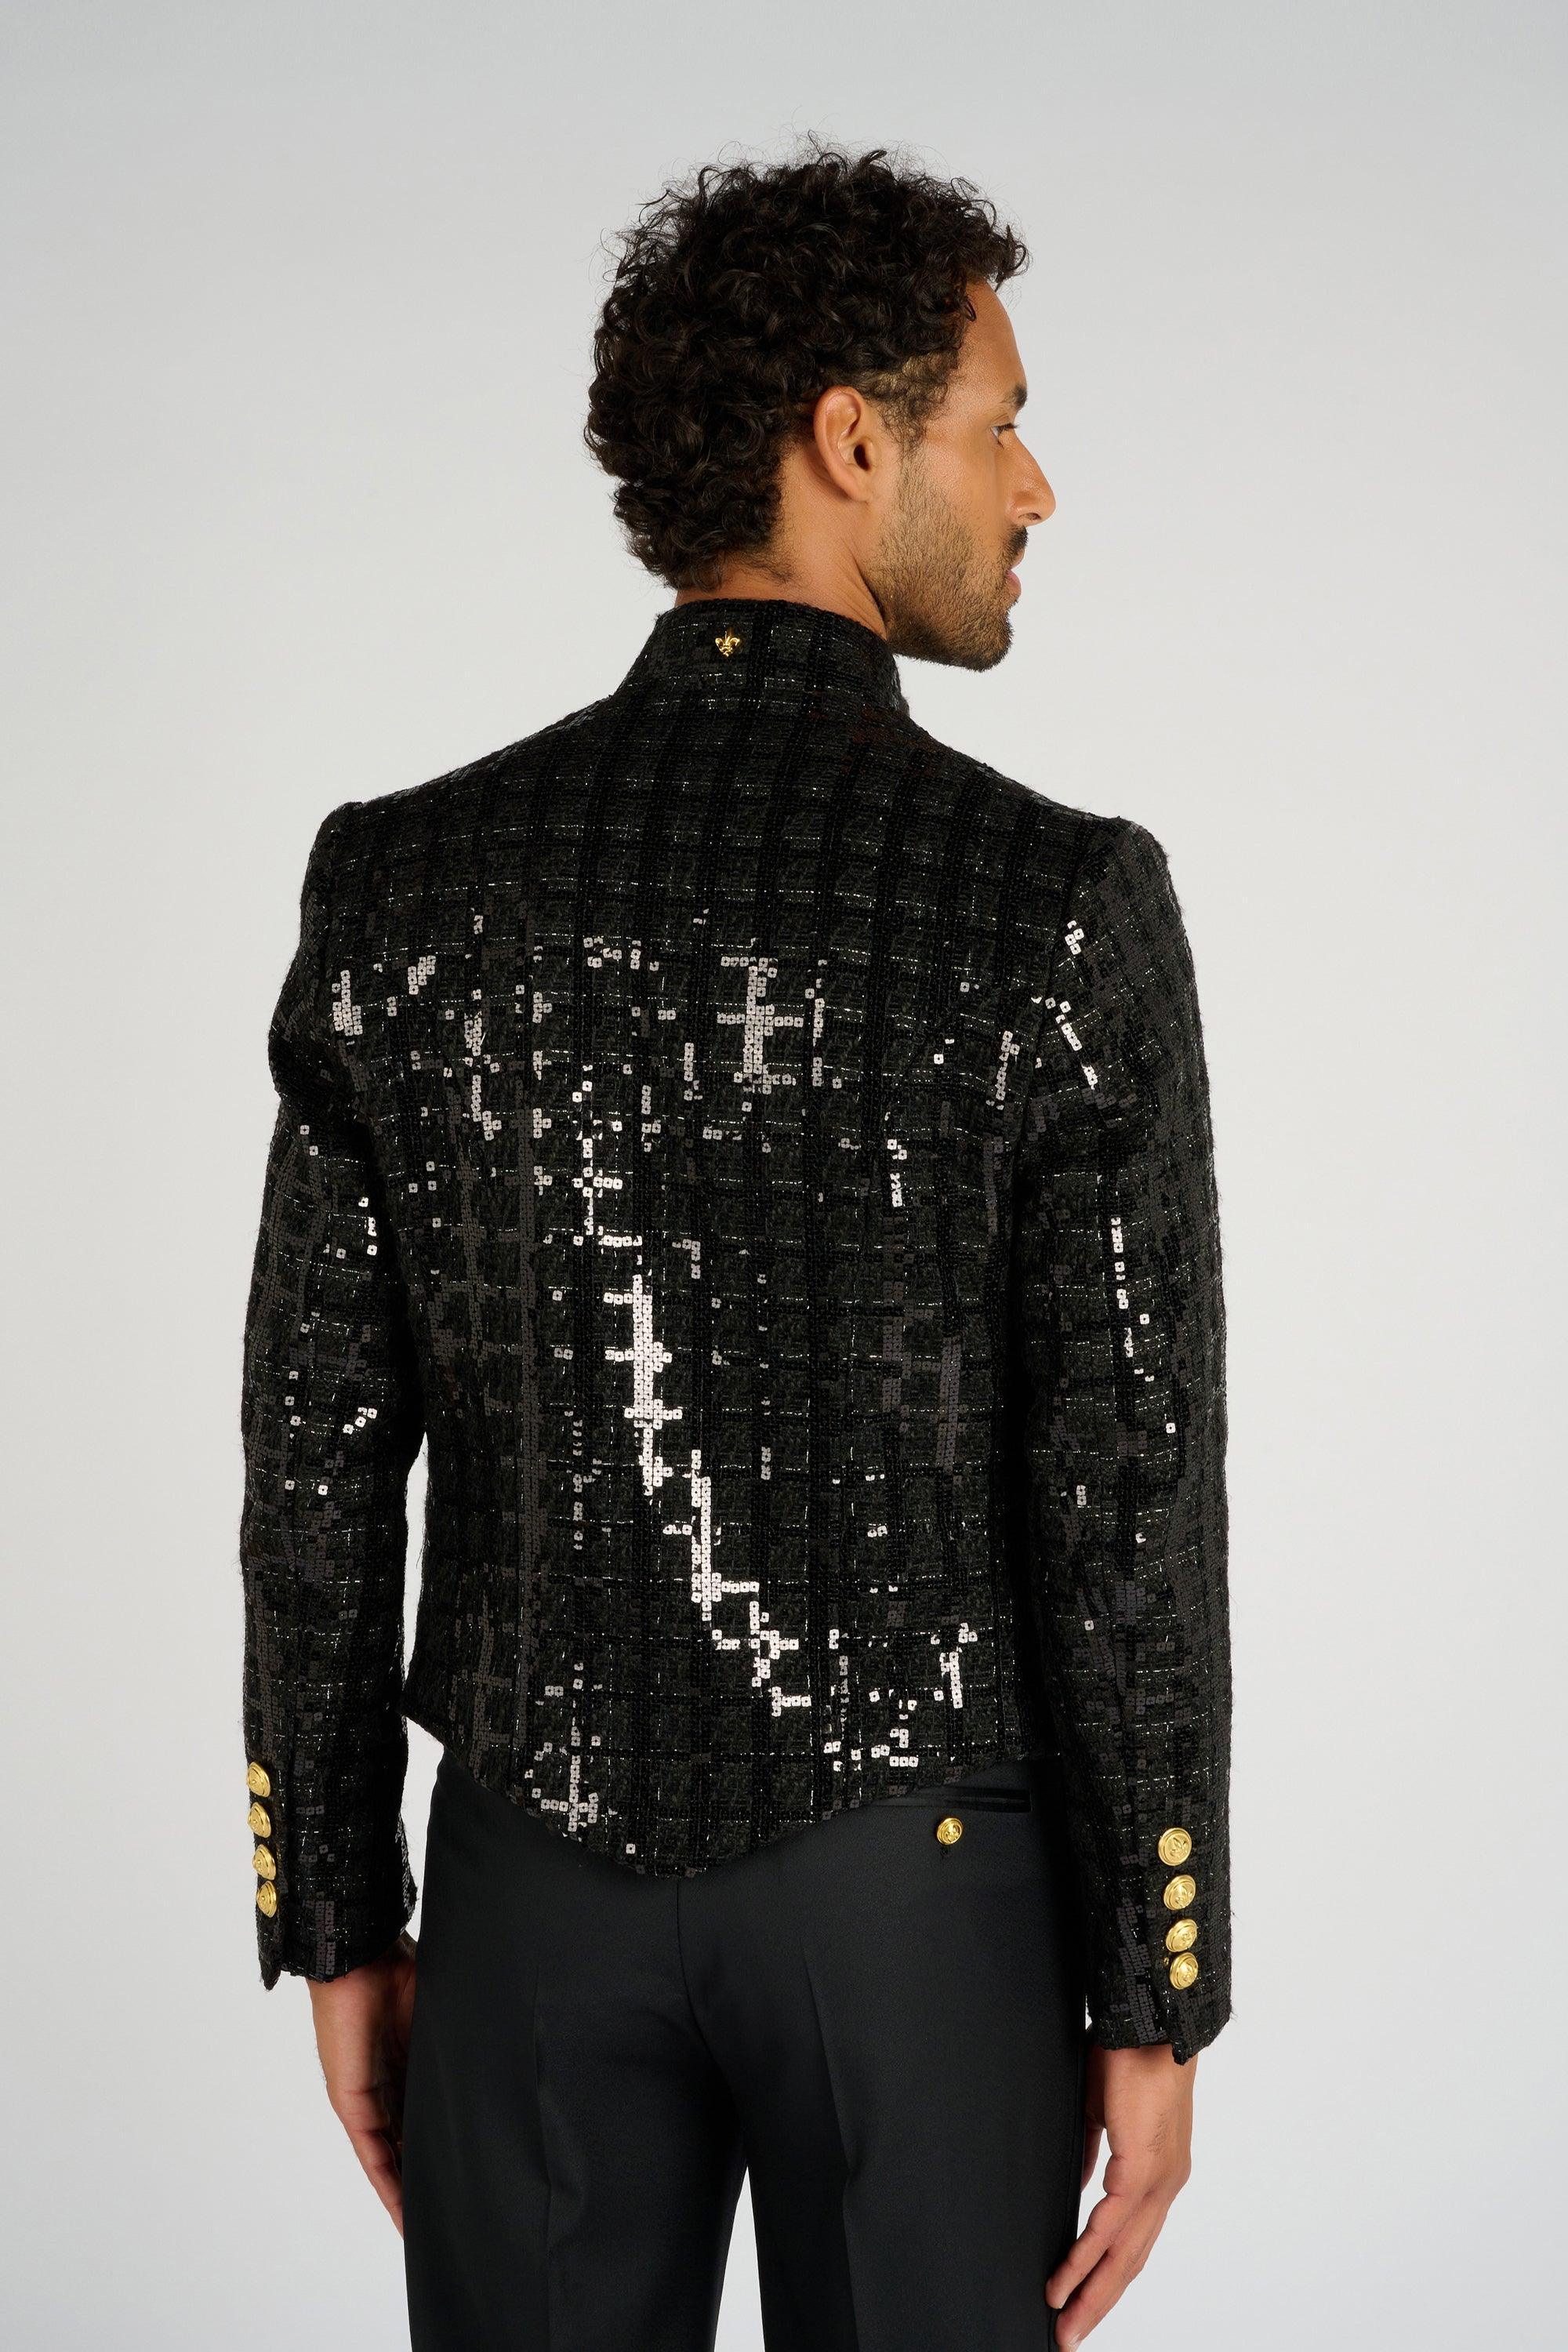 HUSSARD SEQUINS - Lords & Fools dandy, frenchstyle, menfashion, paris, parisianstyle, S24, suit, SUMMER 2024, tailoring